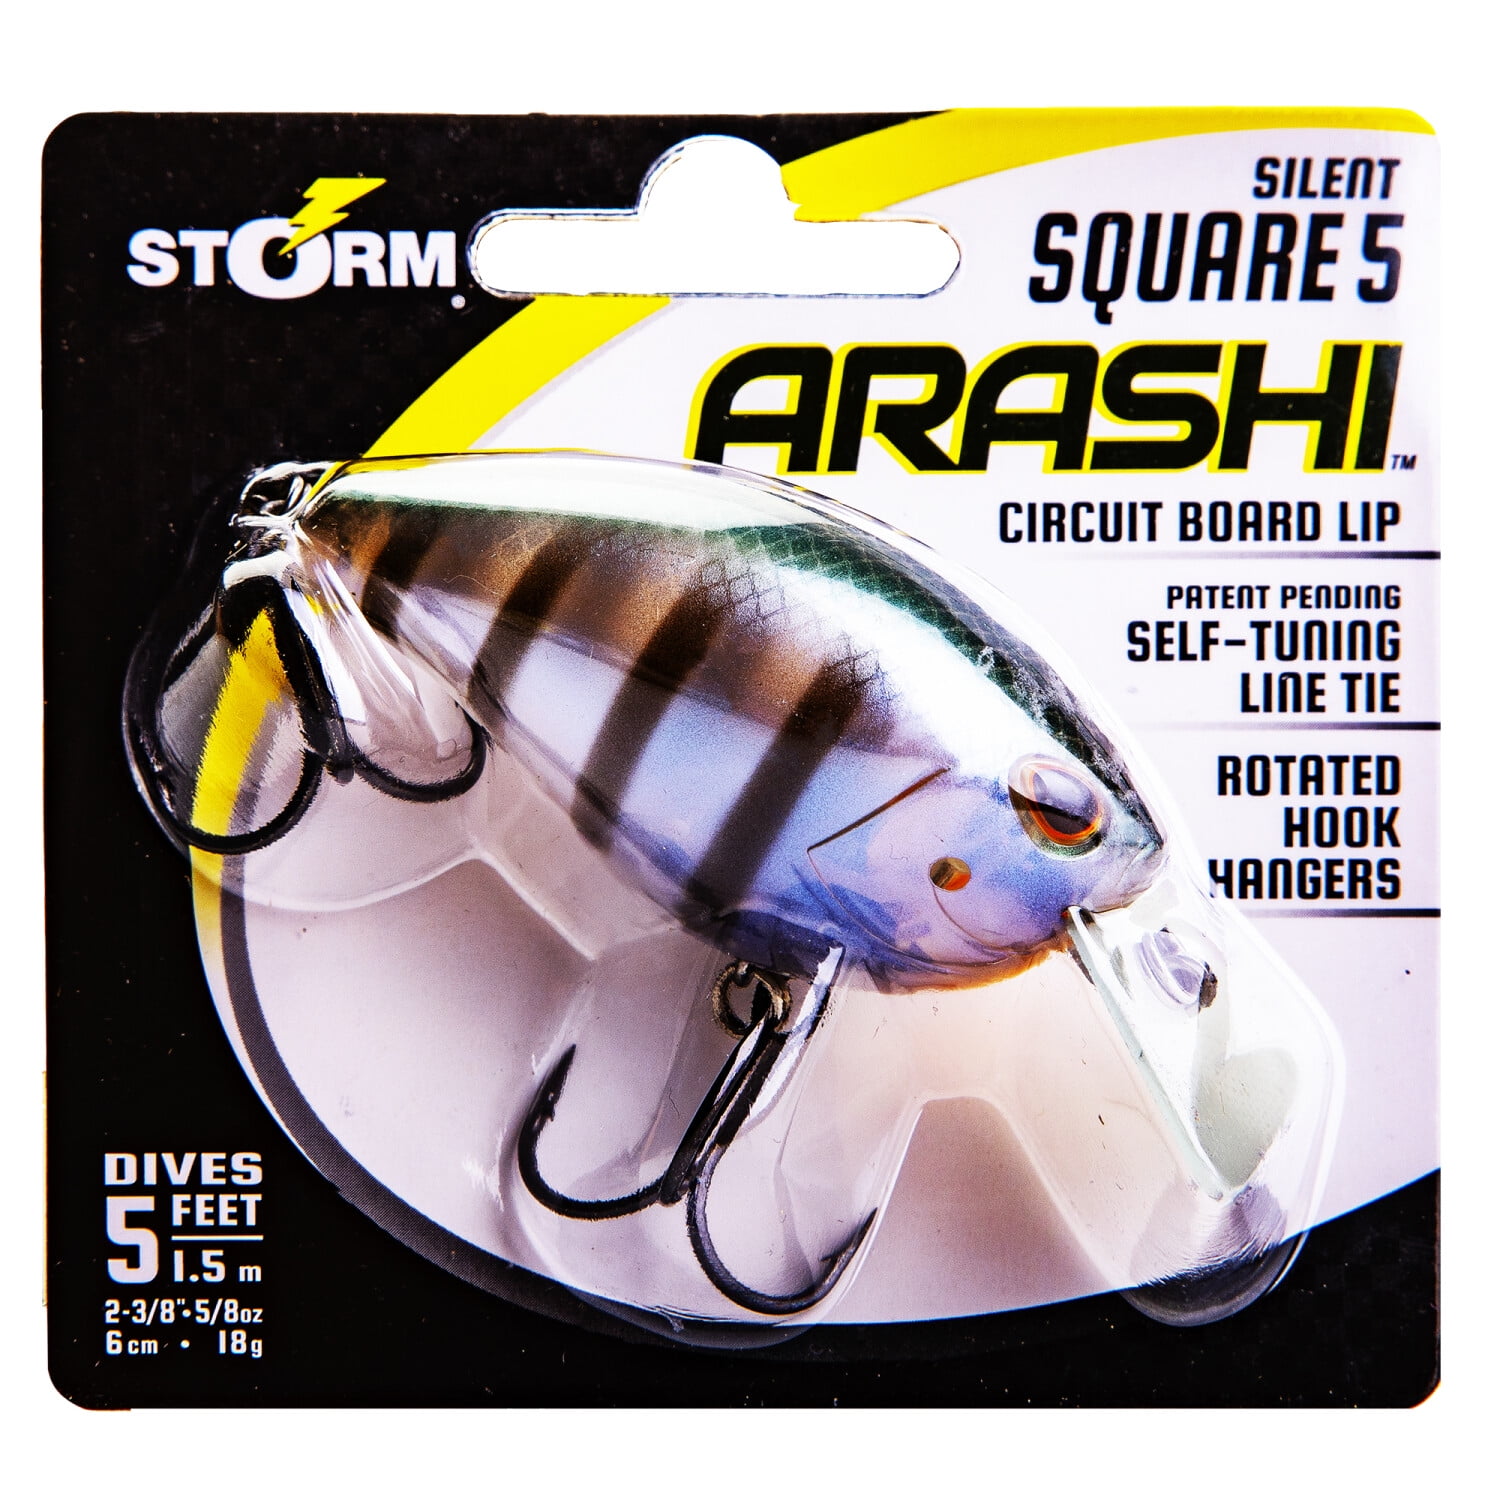 Storm Arashi Silent Square 05 Crankbait, Crappie: Buy Online at Best Price  in Egypt - Souq is now